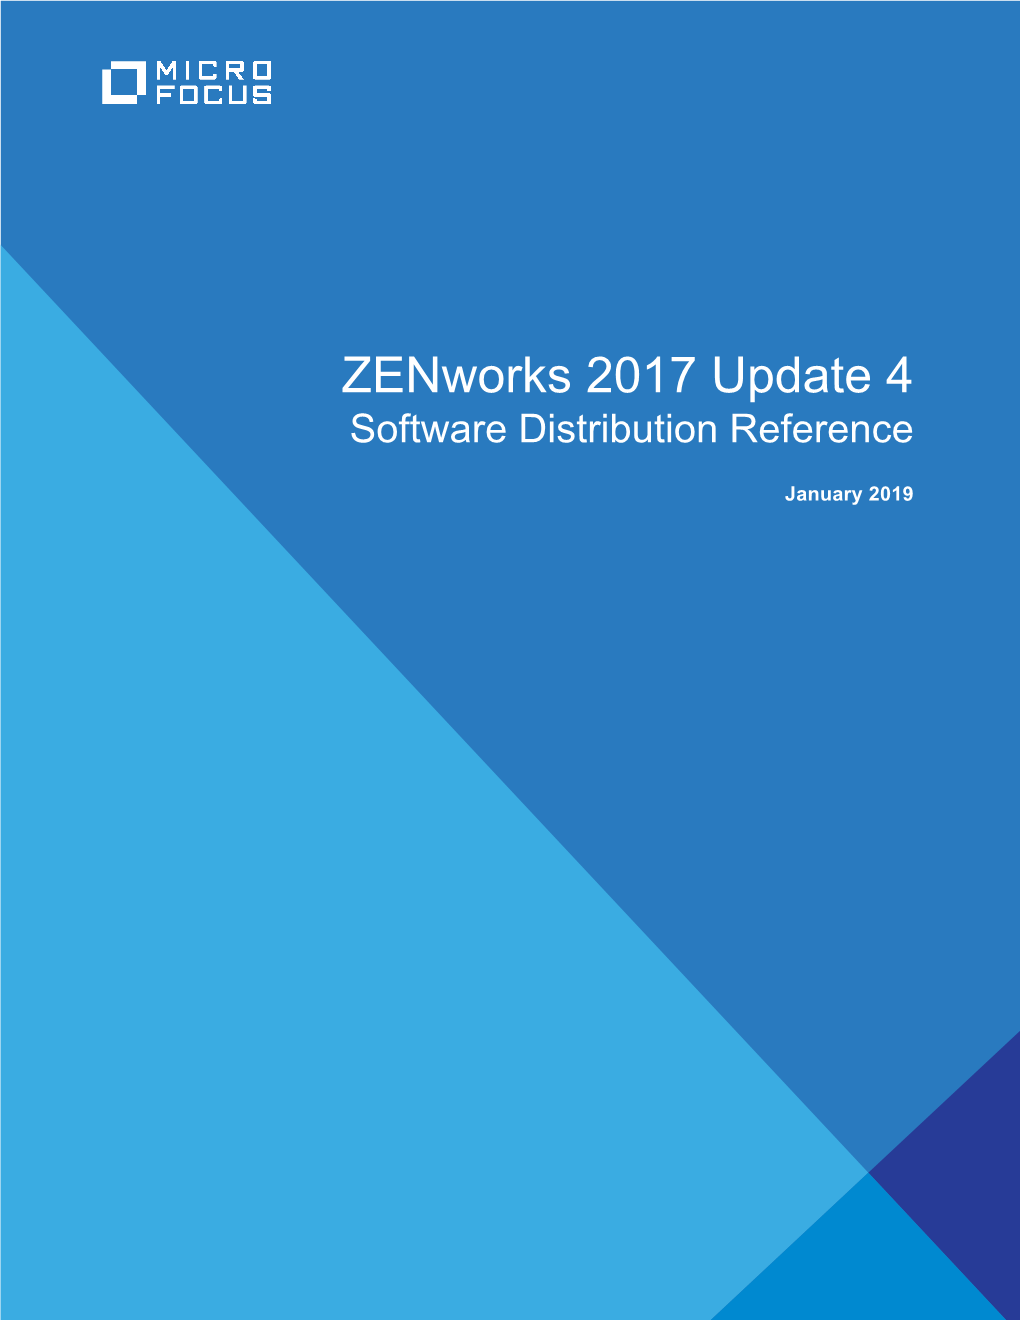 Zenworks Software Distribution Reference Includes Conceptual and Task-Based Information to Help You Effectively Manage Software Distribution in Your Zenworks System